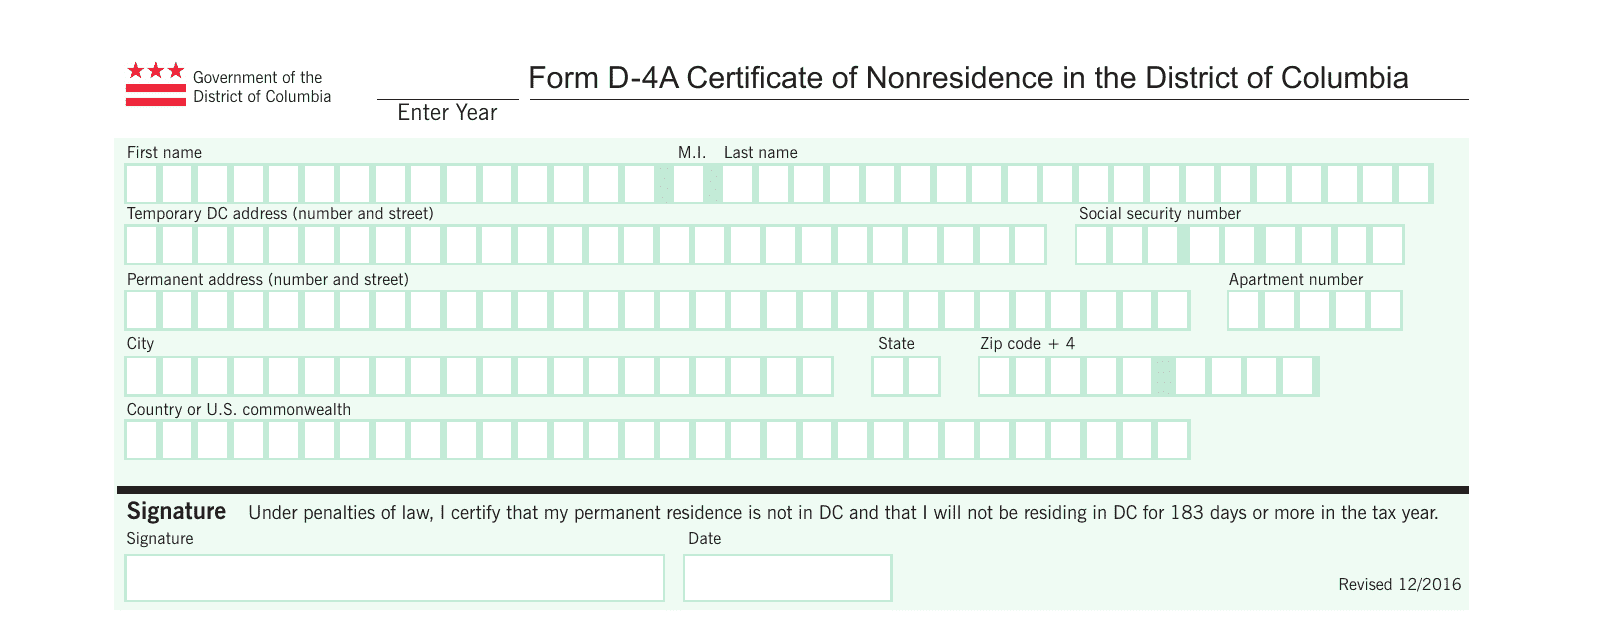 Form D-4A Certificate of Nonresidence in the District of Columbia - Washington, D.C.